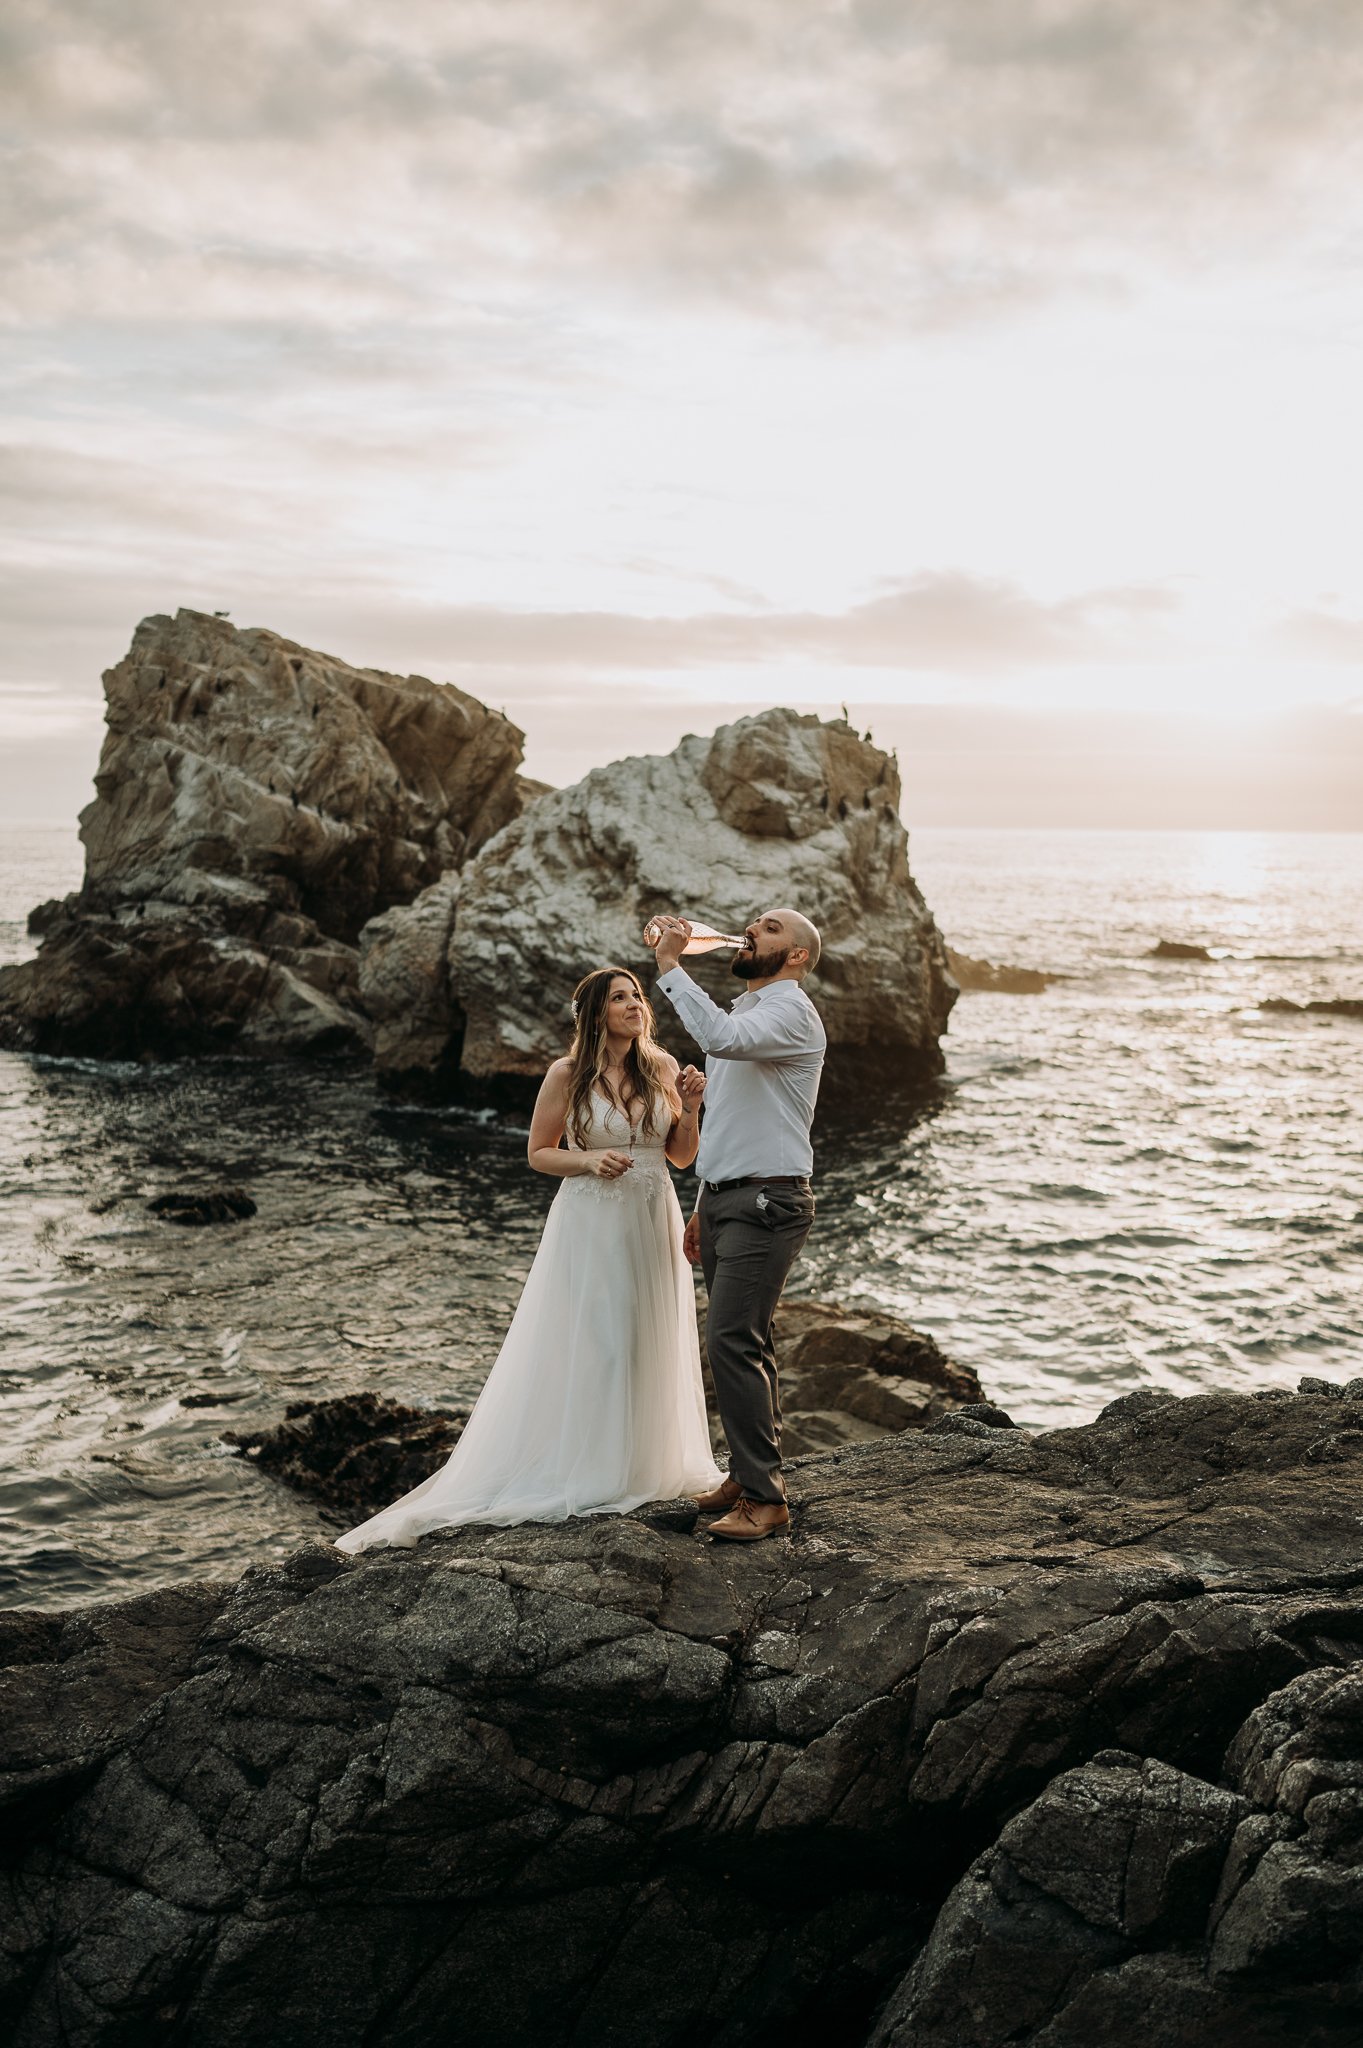 newly married couple celebrating elopement with champagne at edge of cliff in wedding dress and suit pacific ocean and moody grey skies in background 